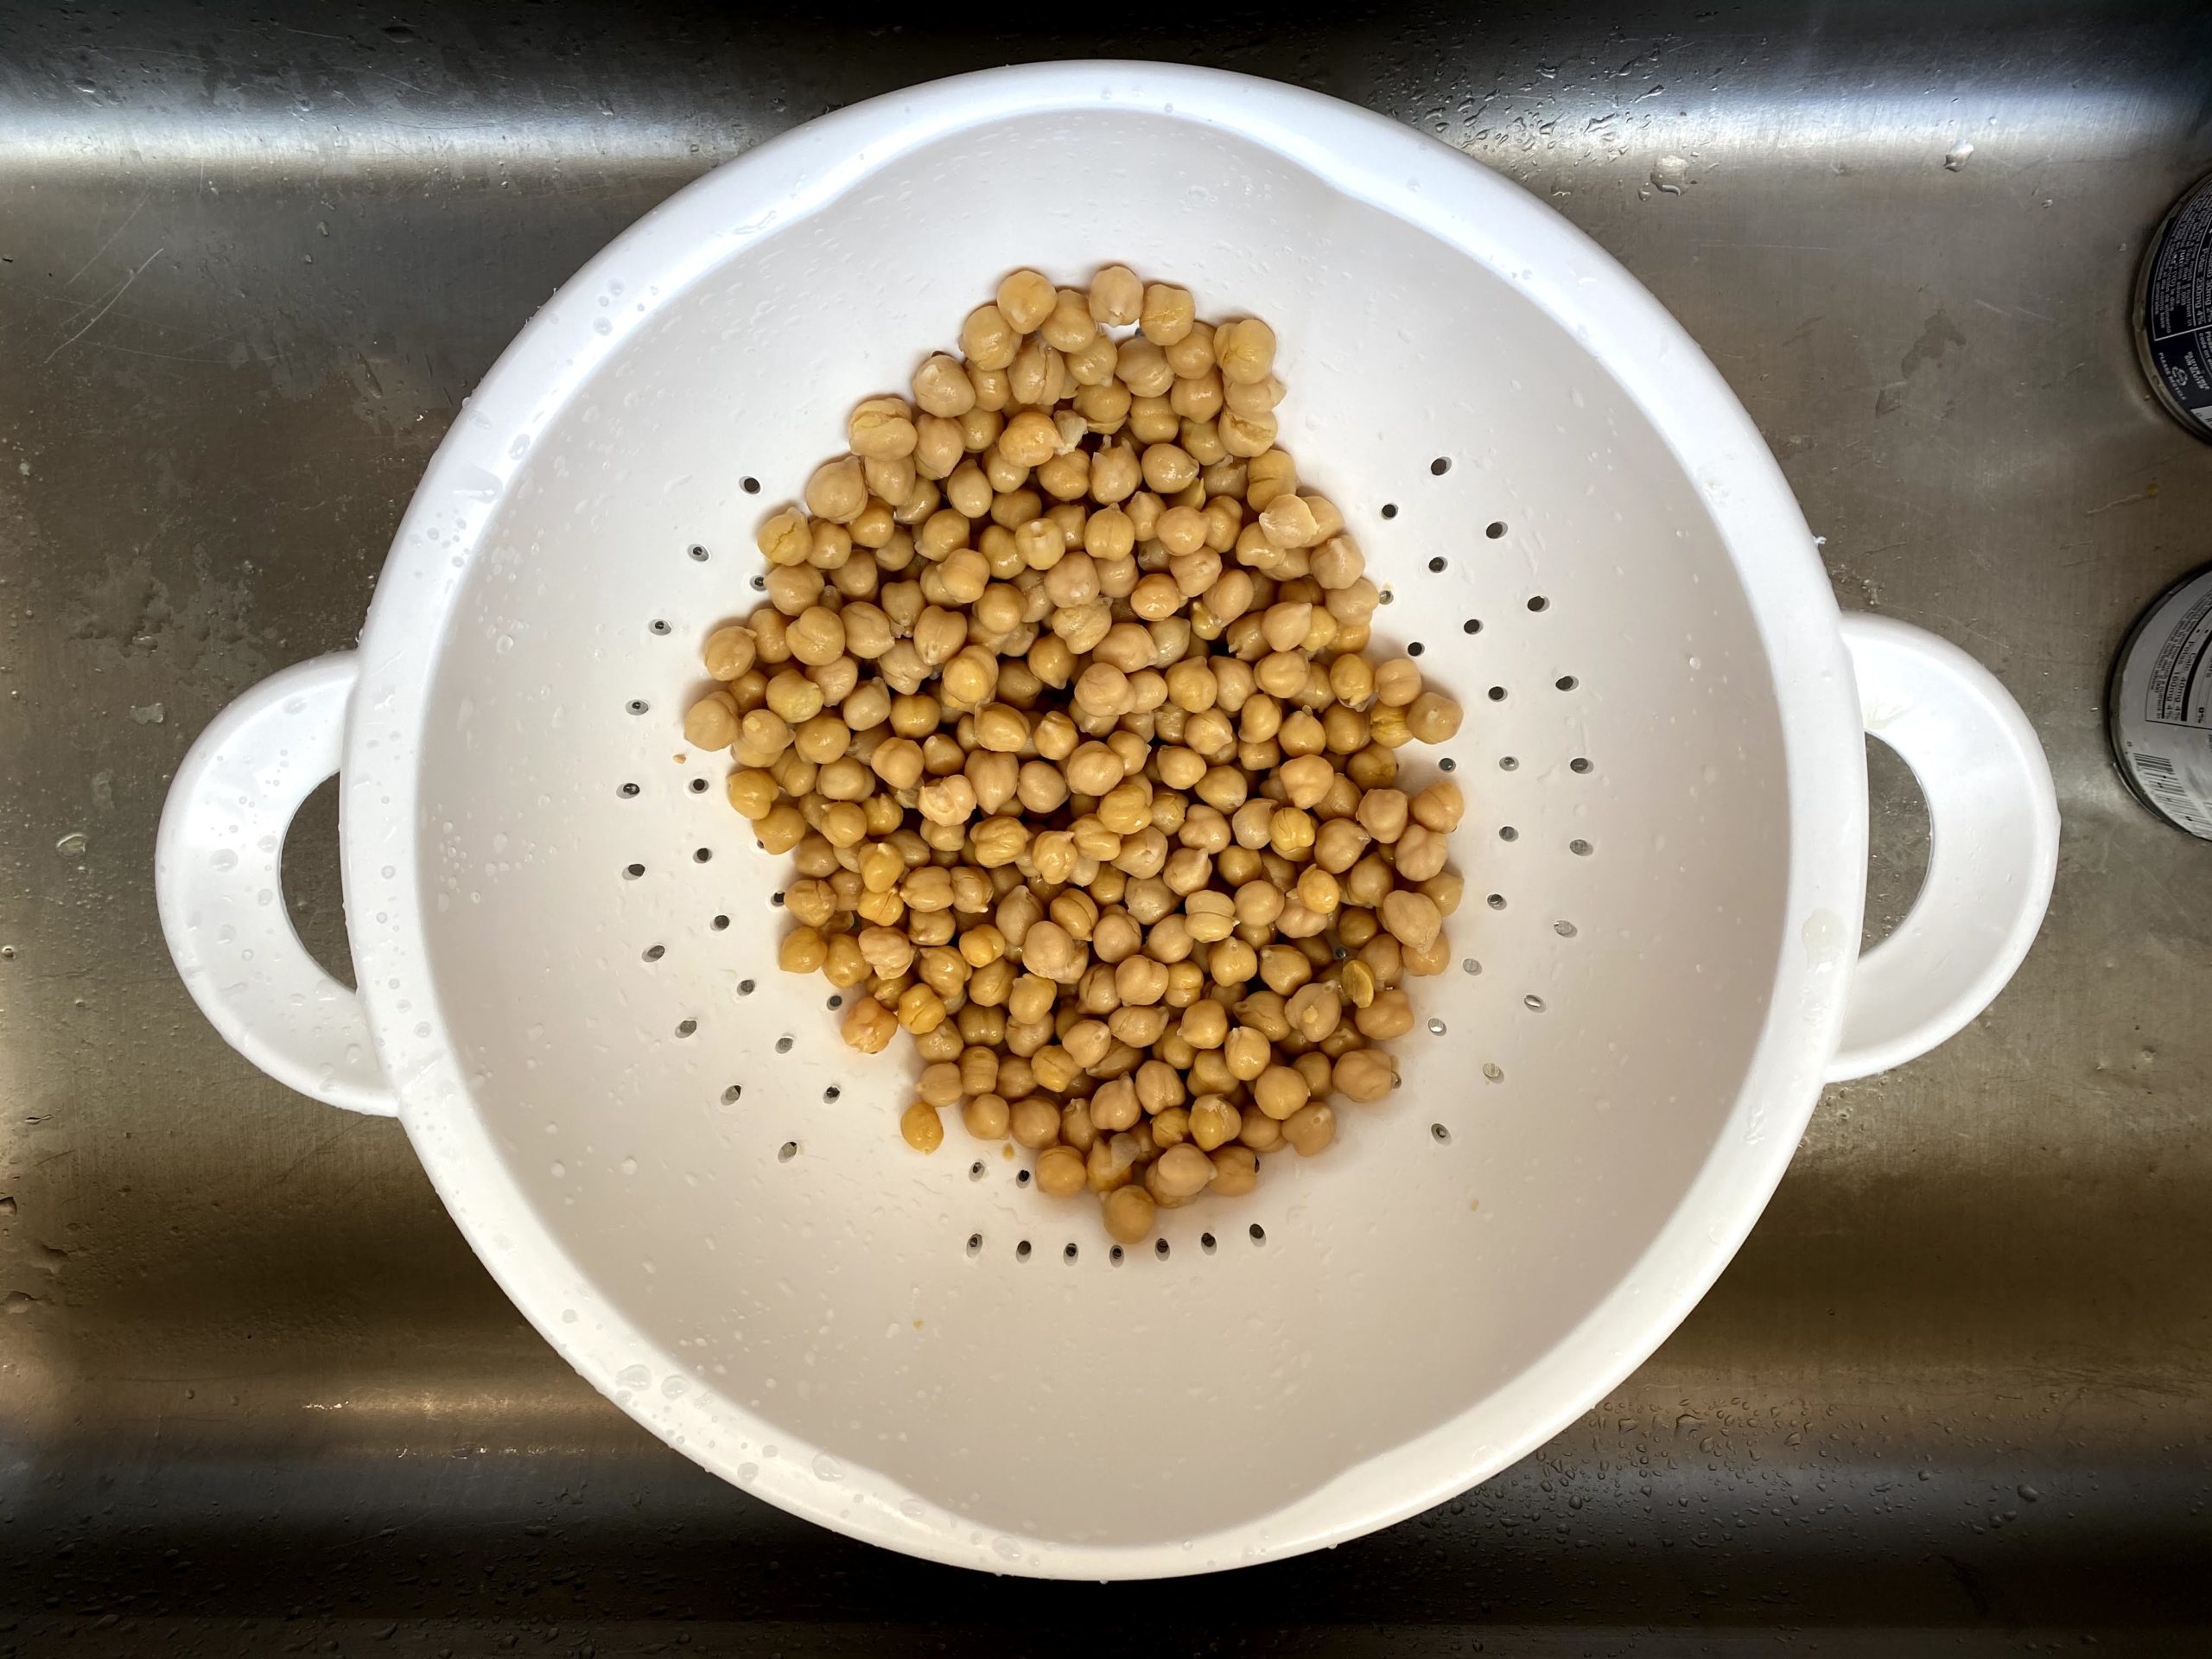 drained chick peas